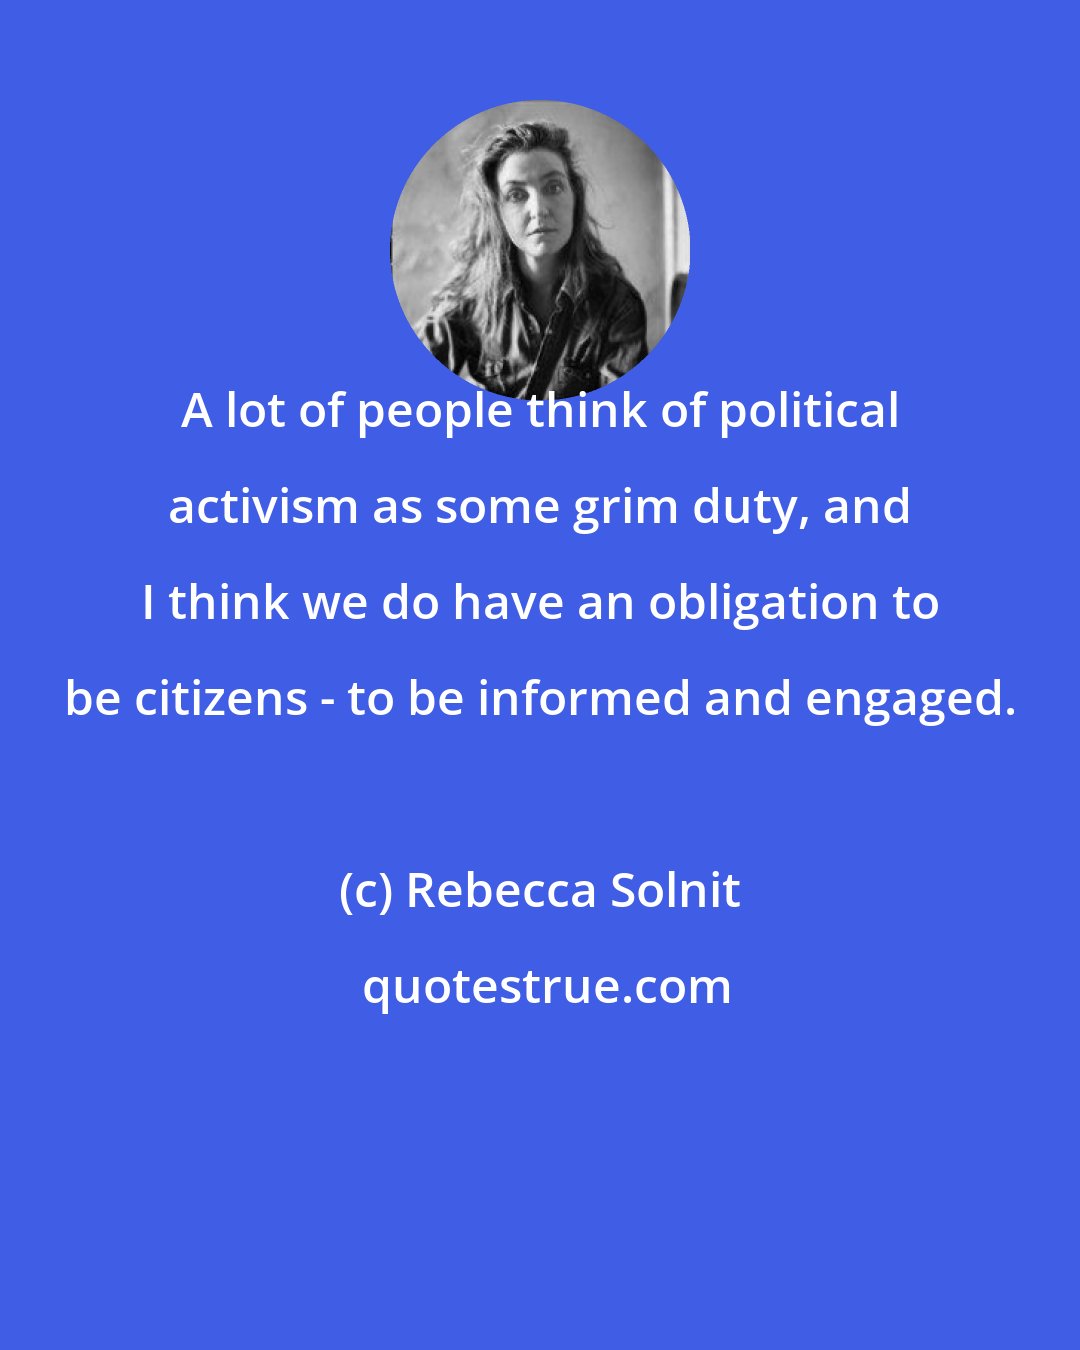 Rebecca Solnit: A lot of people think of political activism as some grim duty, and I think we do have an obligation to be citizens - to be informed and engaged.